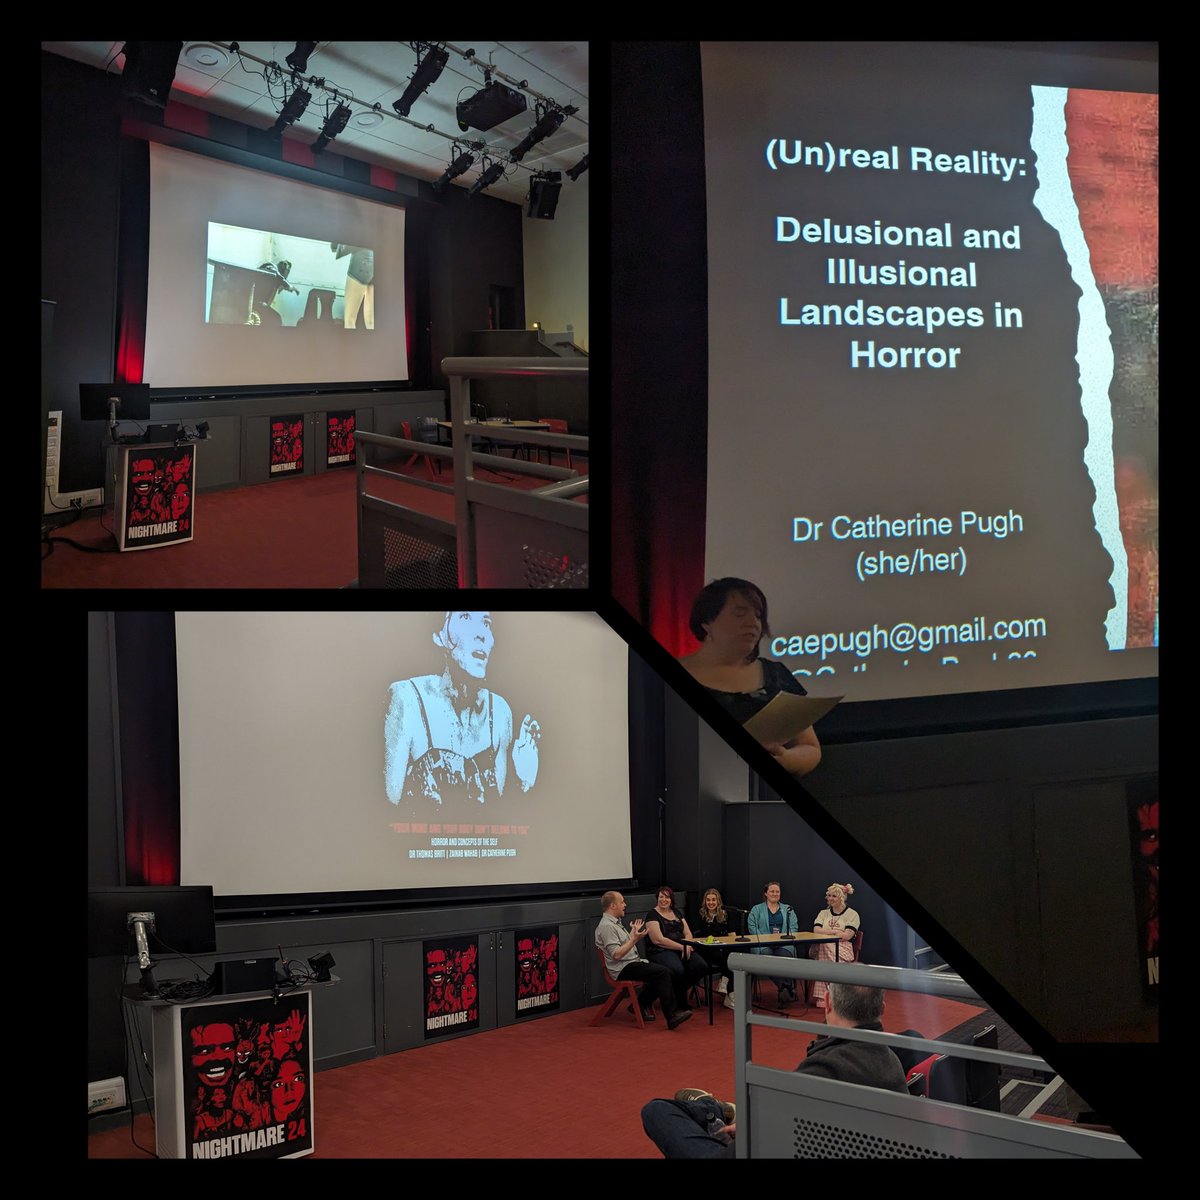 Panel 3 - 'Your mind and your body don't belong to you' - Horror and Concepts of the Self. Another great panel which ended with a roundtable discussion. Thanks you Thomas, Catherine and our roundtable guests. #nightmare24 #HorrorMovies #horrorstudies #horrorfilm #horrorconference